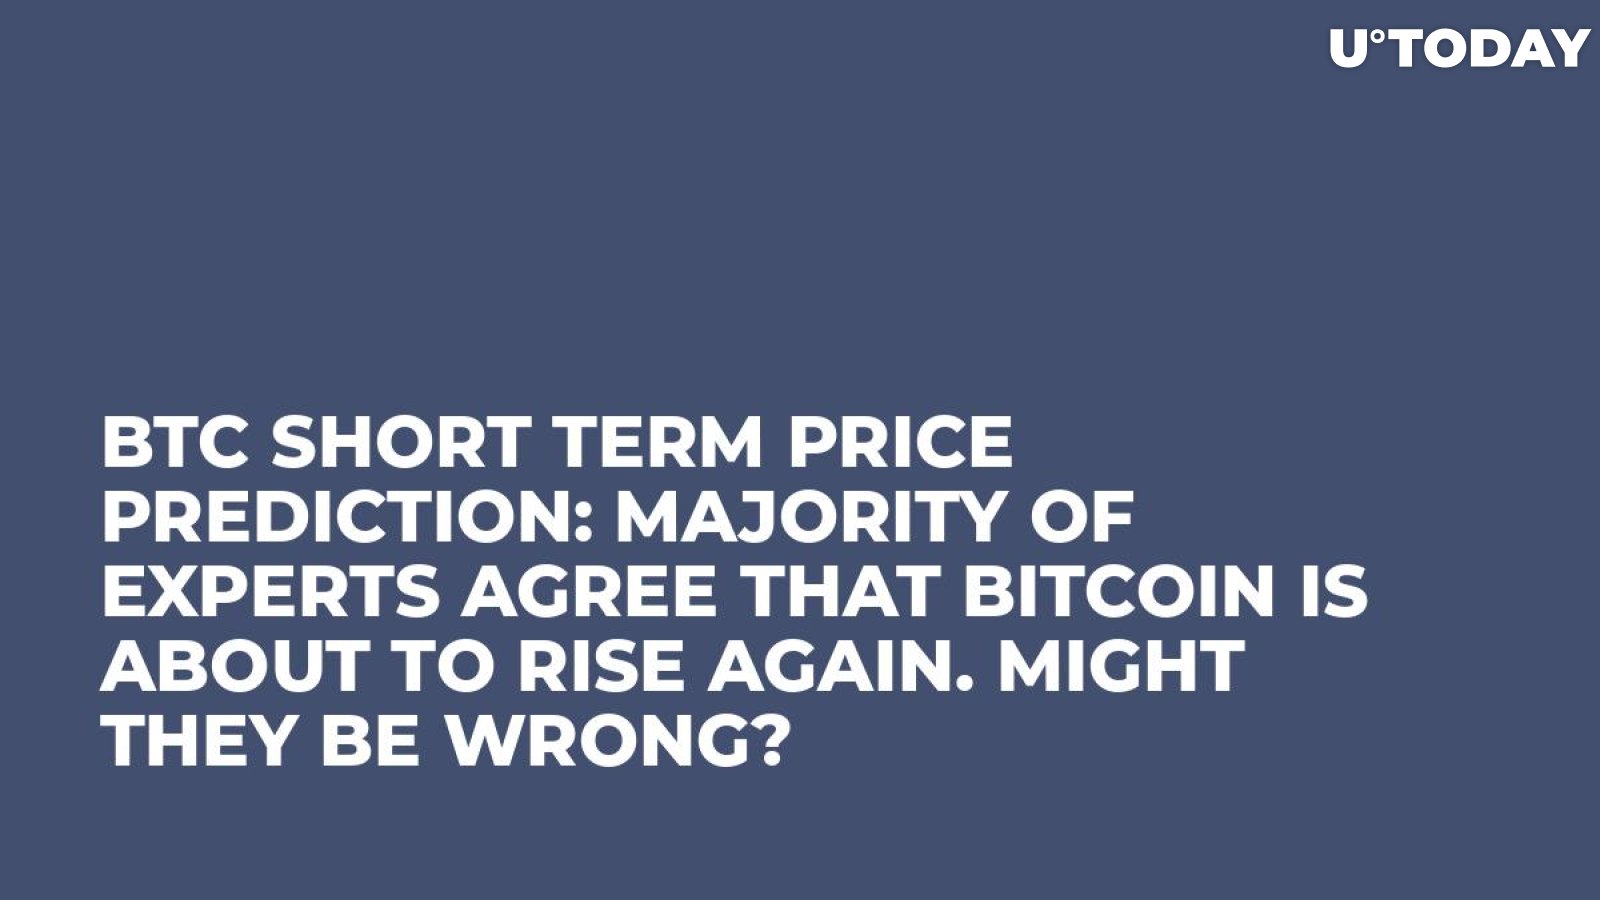 BTC Short Term Price Prediction: Majority of Experts Agree That Bitcoin Is About to Rise Again. Might They Be Wrong?